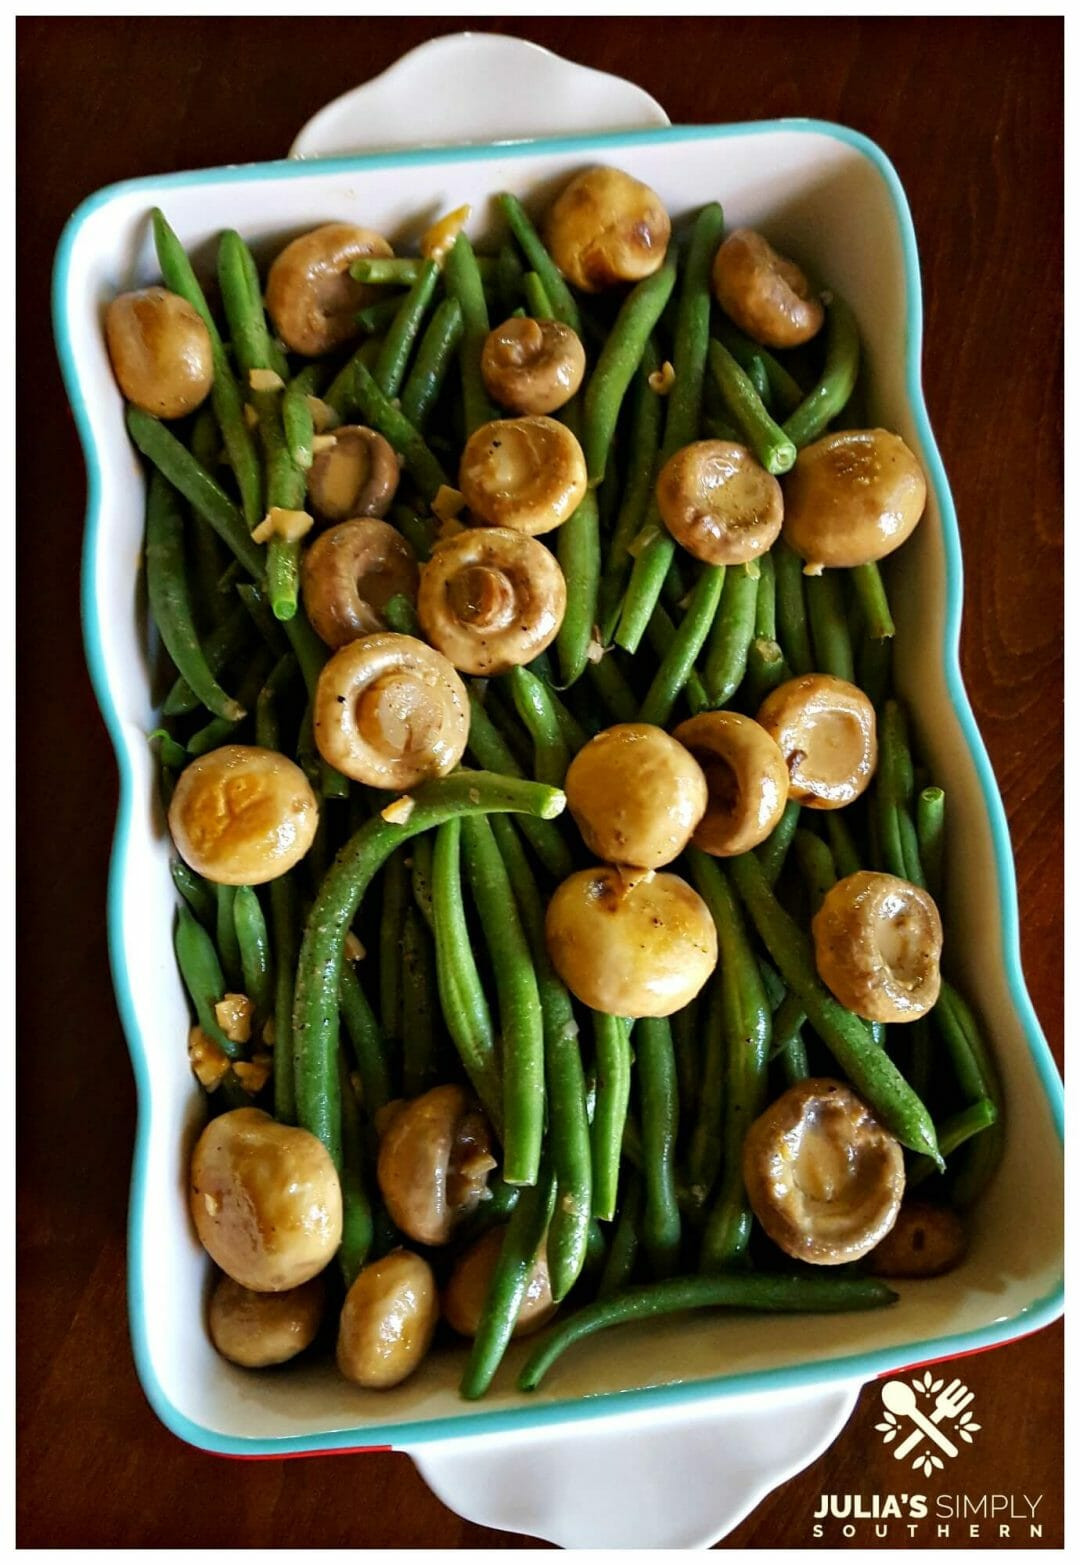 Green Bean And Mushroom Recipe
 Green Beans with Mushrooms Julias Simply Southern